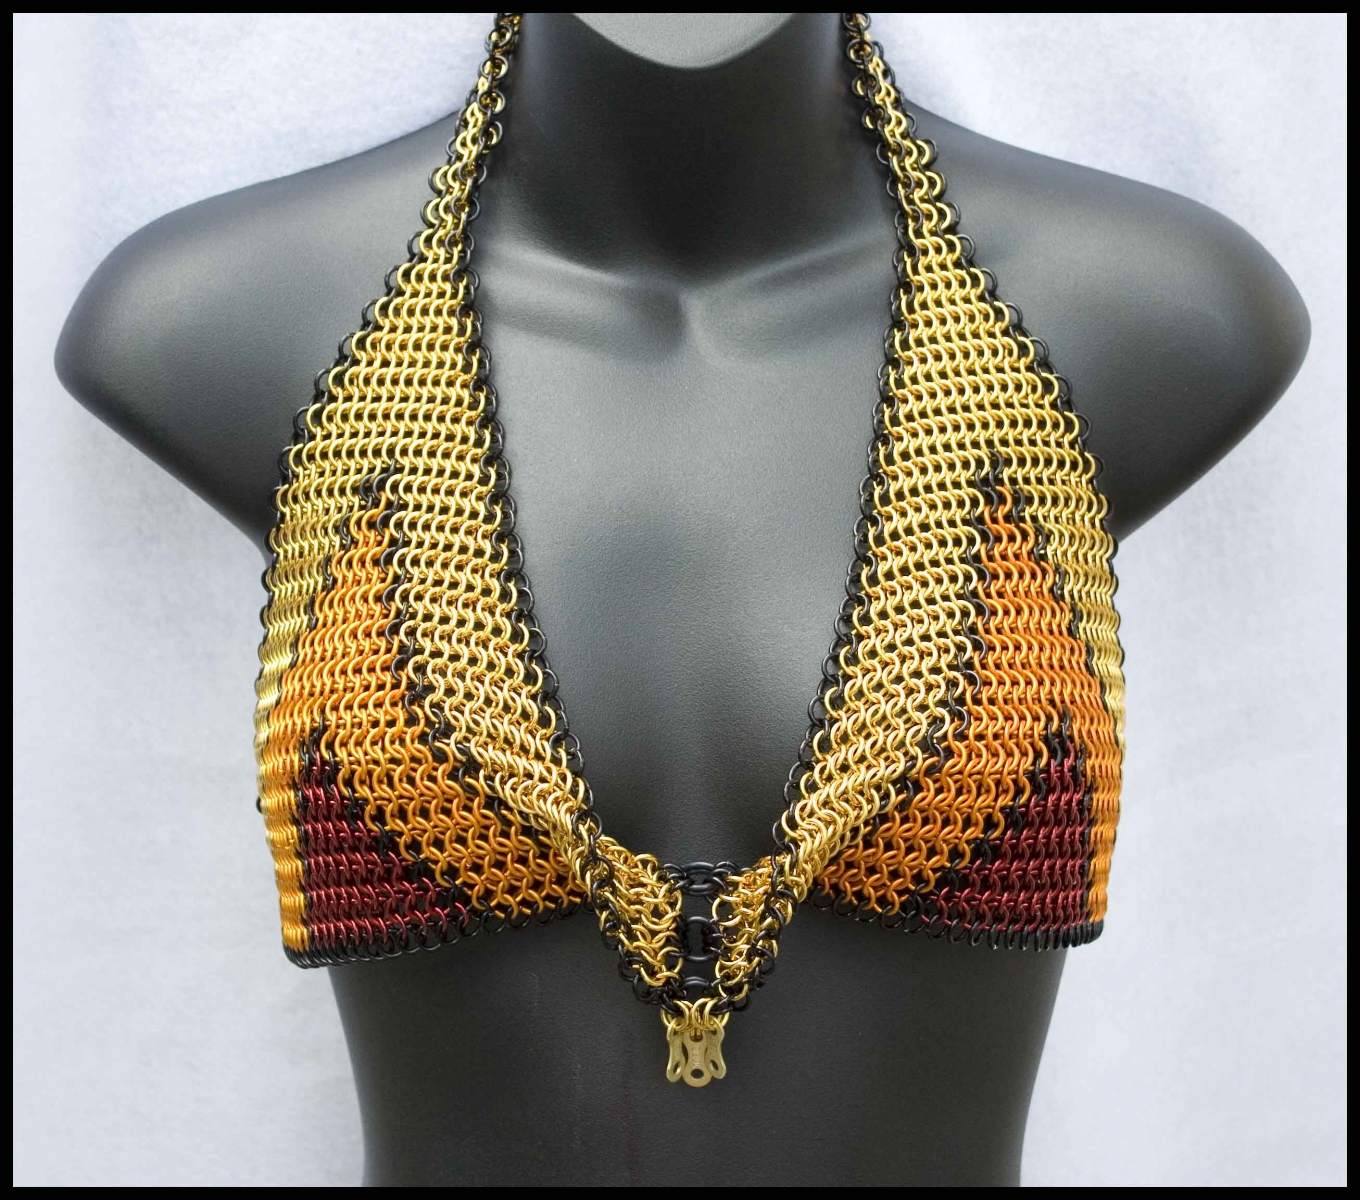 ...gold, orange and red in European 4-1 chainmaille pattern. 